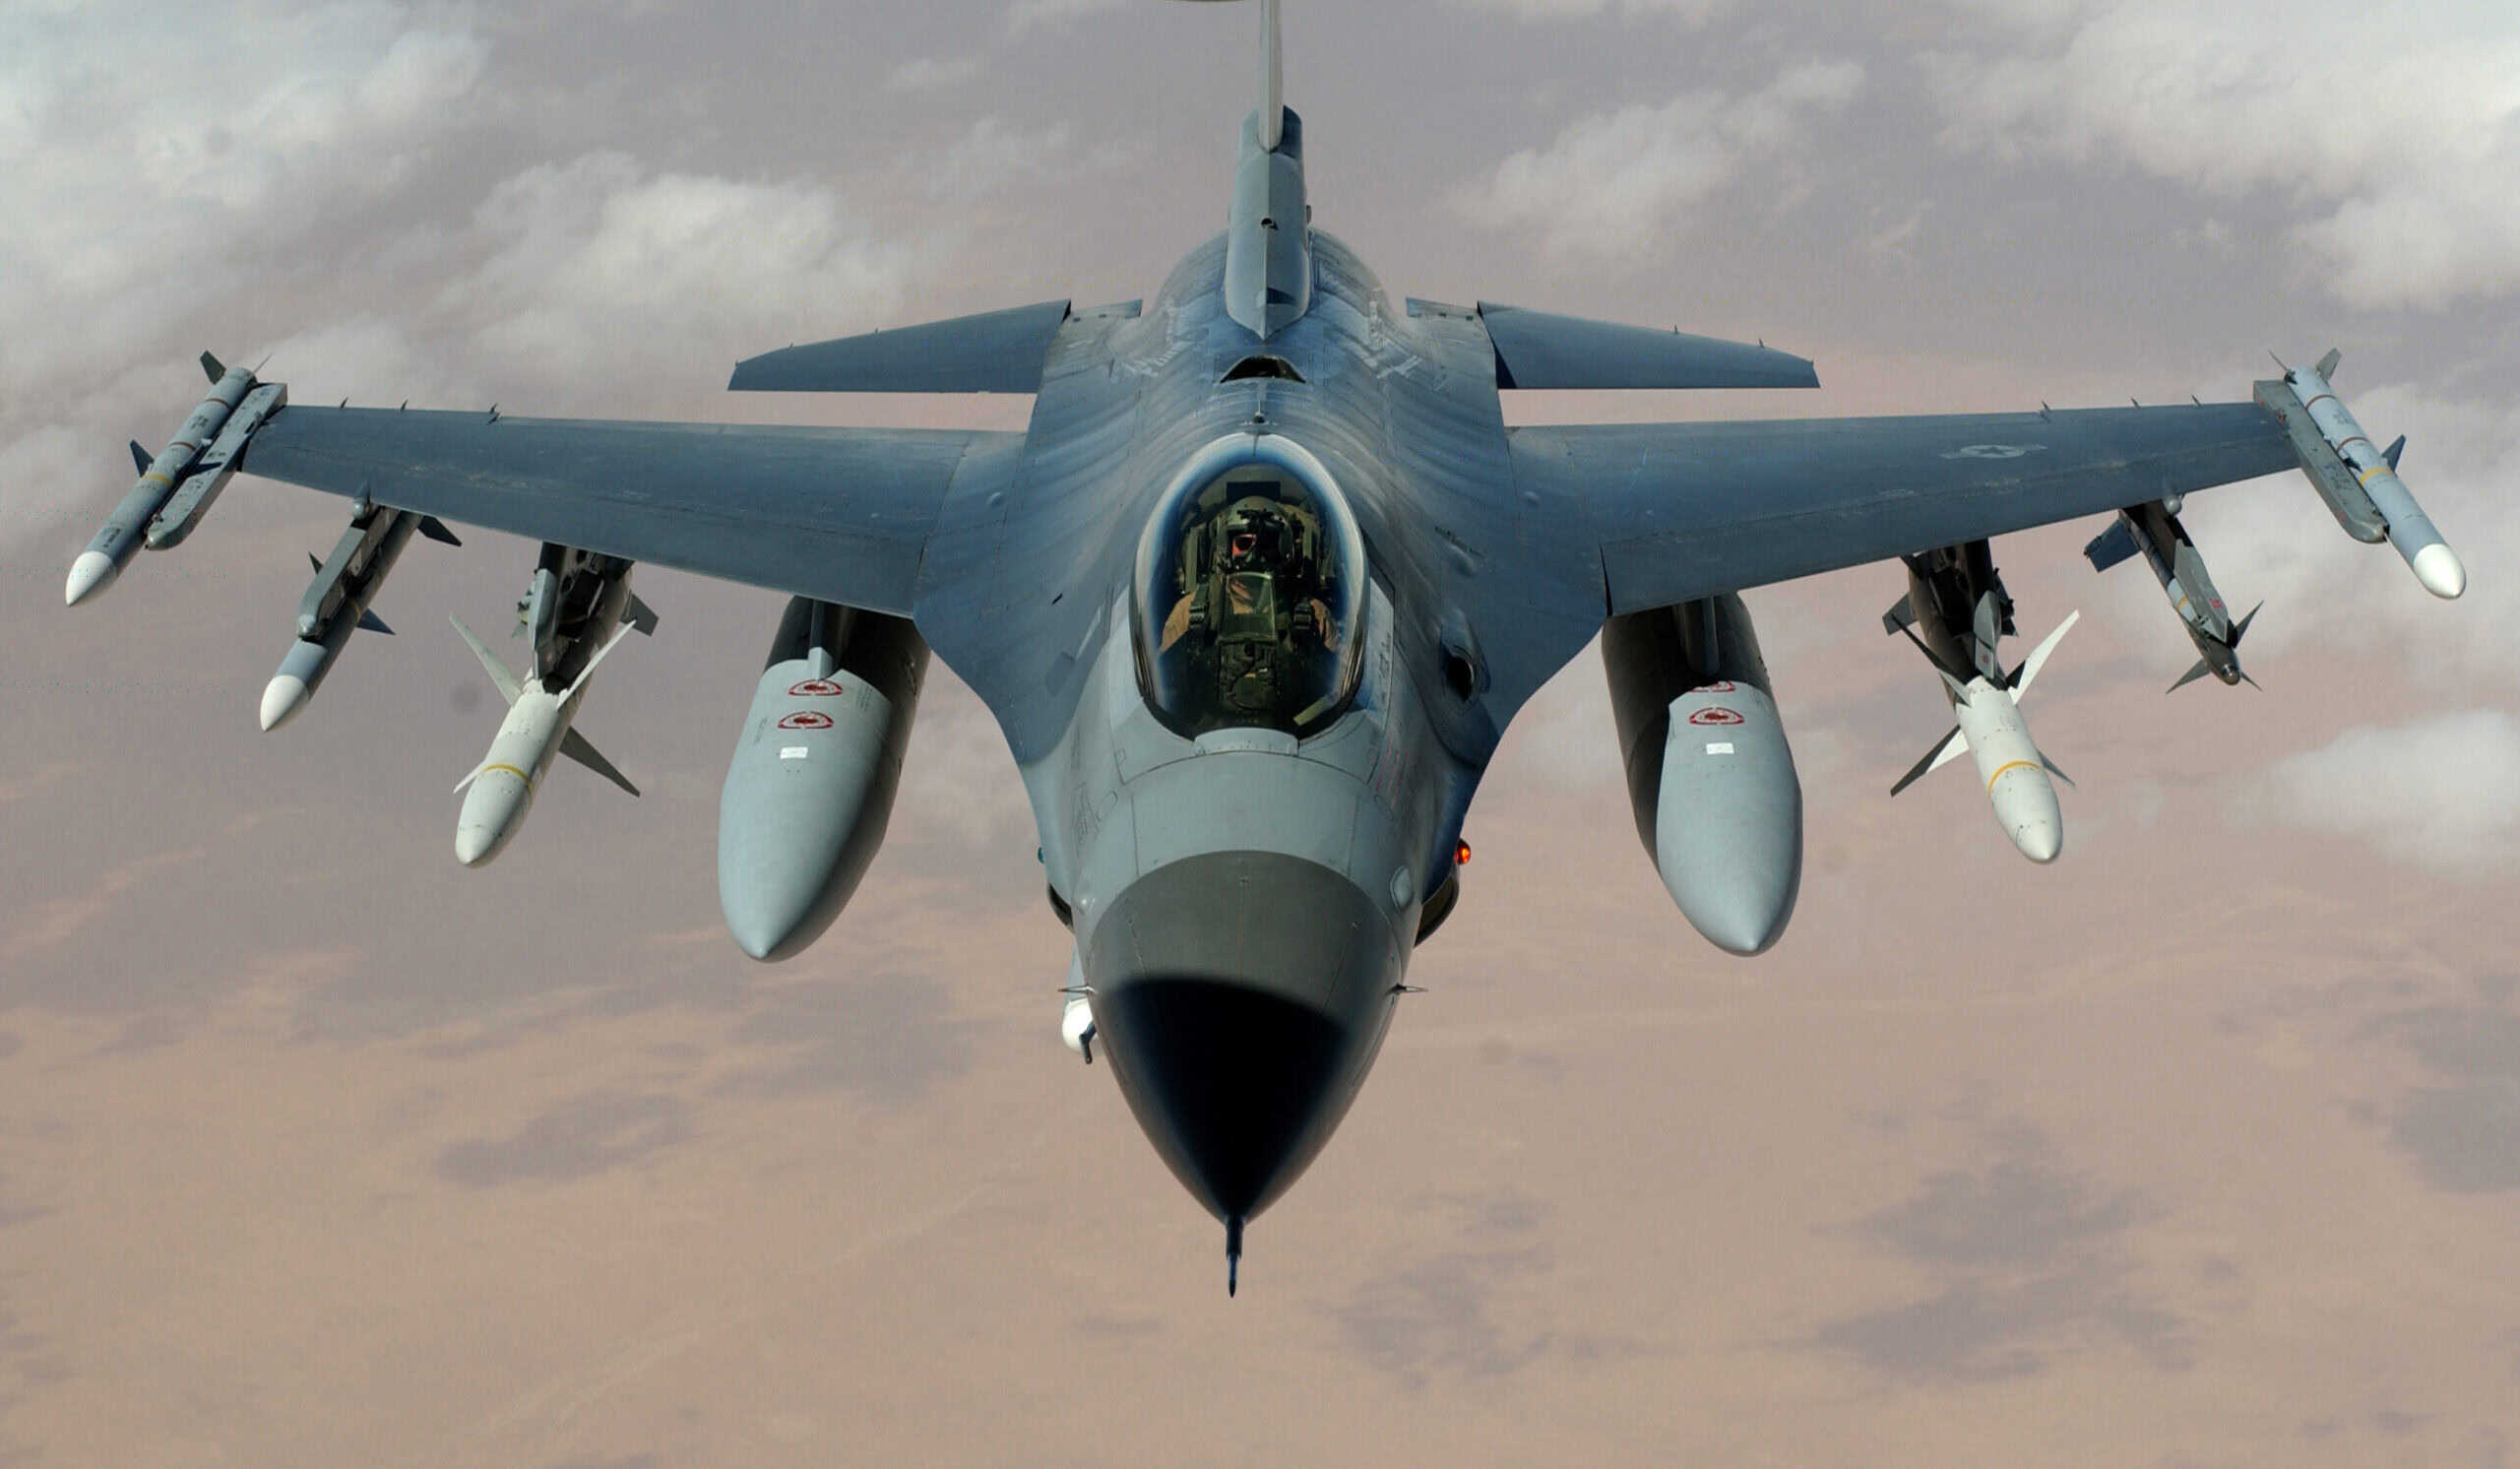 File:F-16 Fighting Falcon.jpg by Staff Sgt. Cherie A. Thurlby